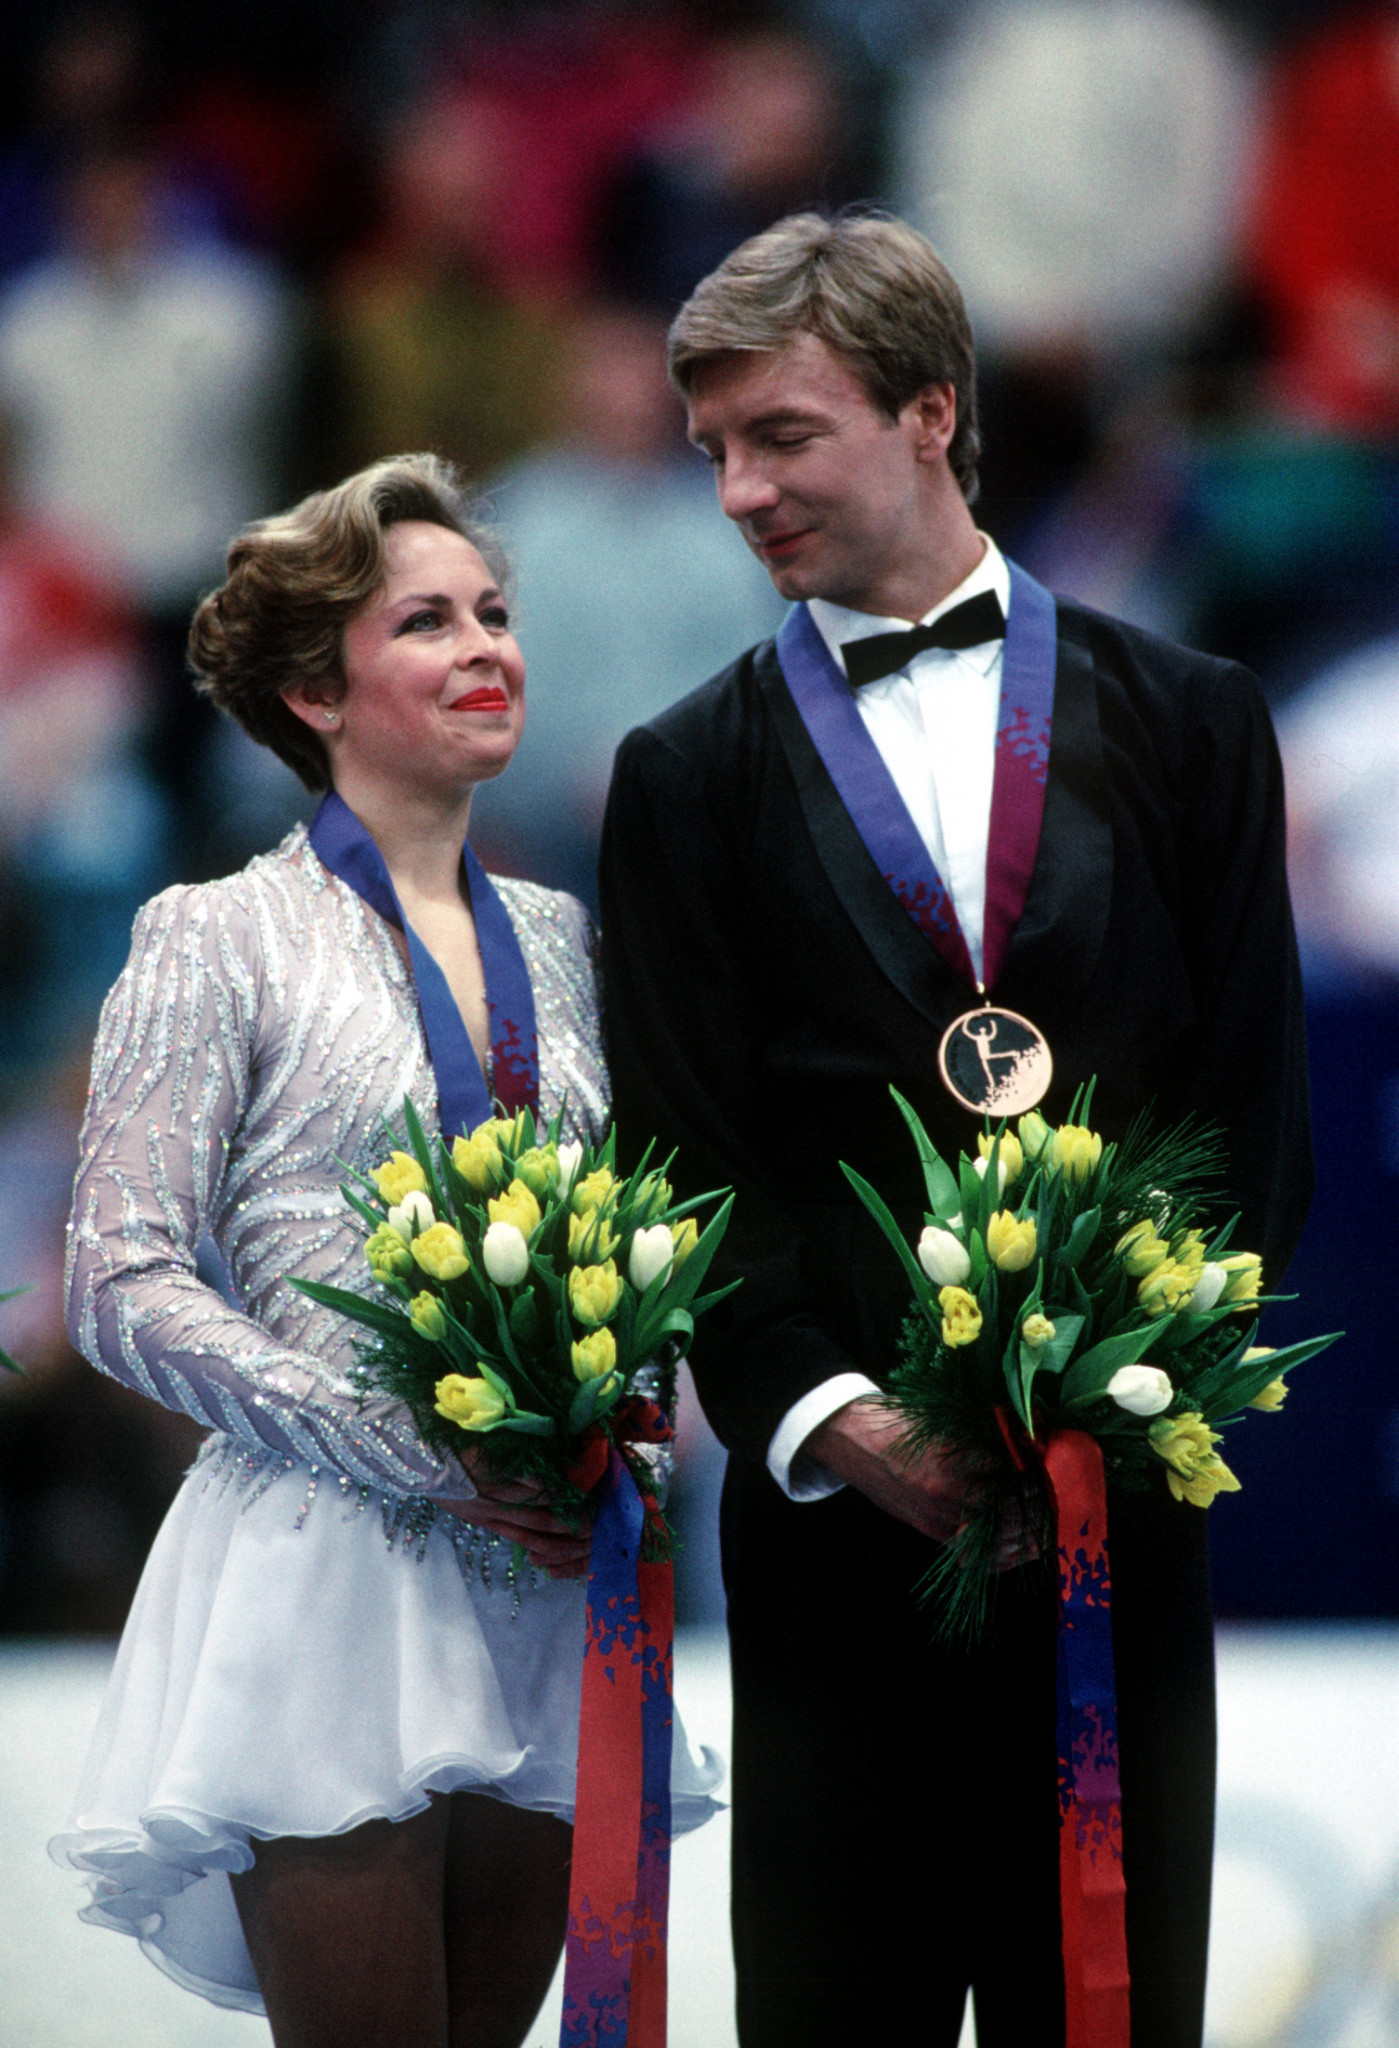 Back for bronze - after a 10-year hiatus, Britain's Olympic ice dance champions of 1984 had to settle for third place at the Lillehammer Games ©Getty Images